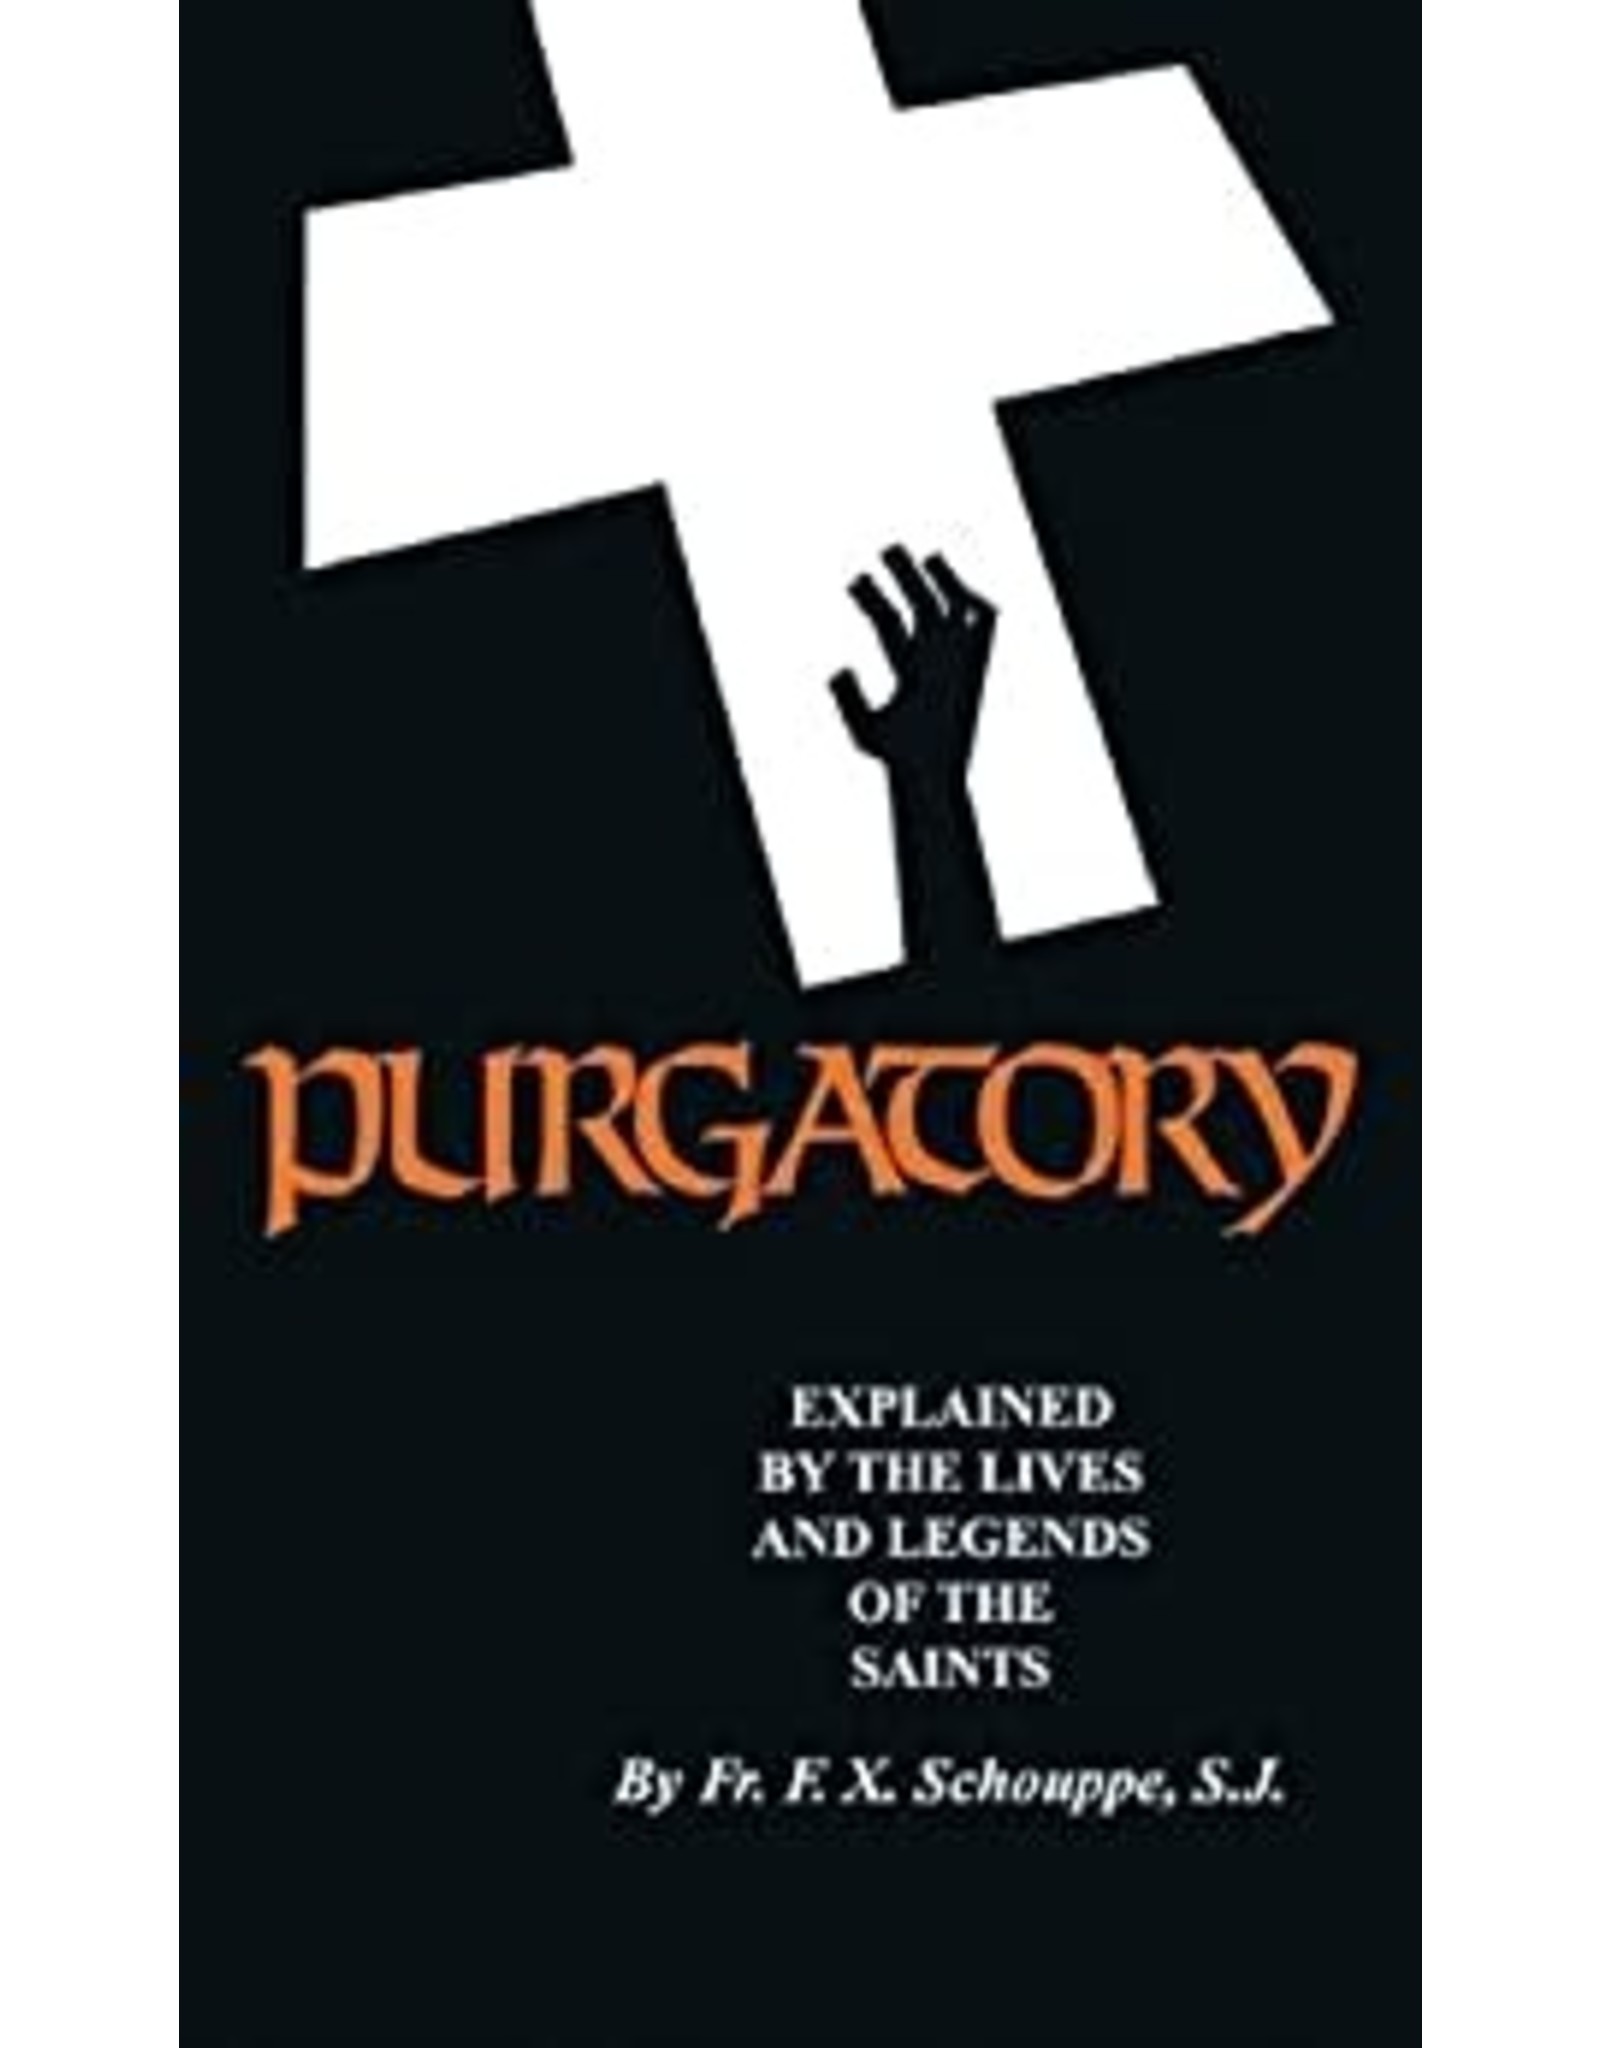 Tan Books Purgatory: Explained by the Lives and Legends of the Saints by Fr. F.X. Schouppe, S.J (Paperback)